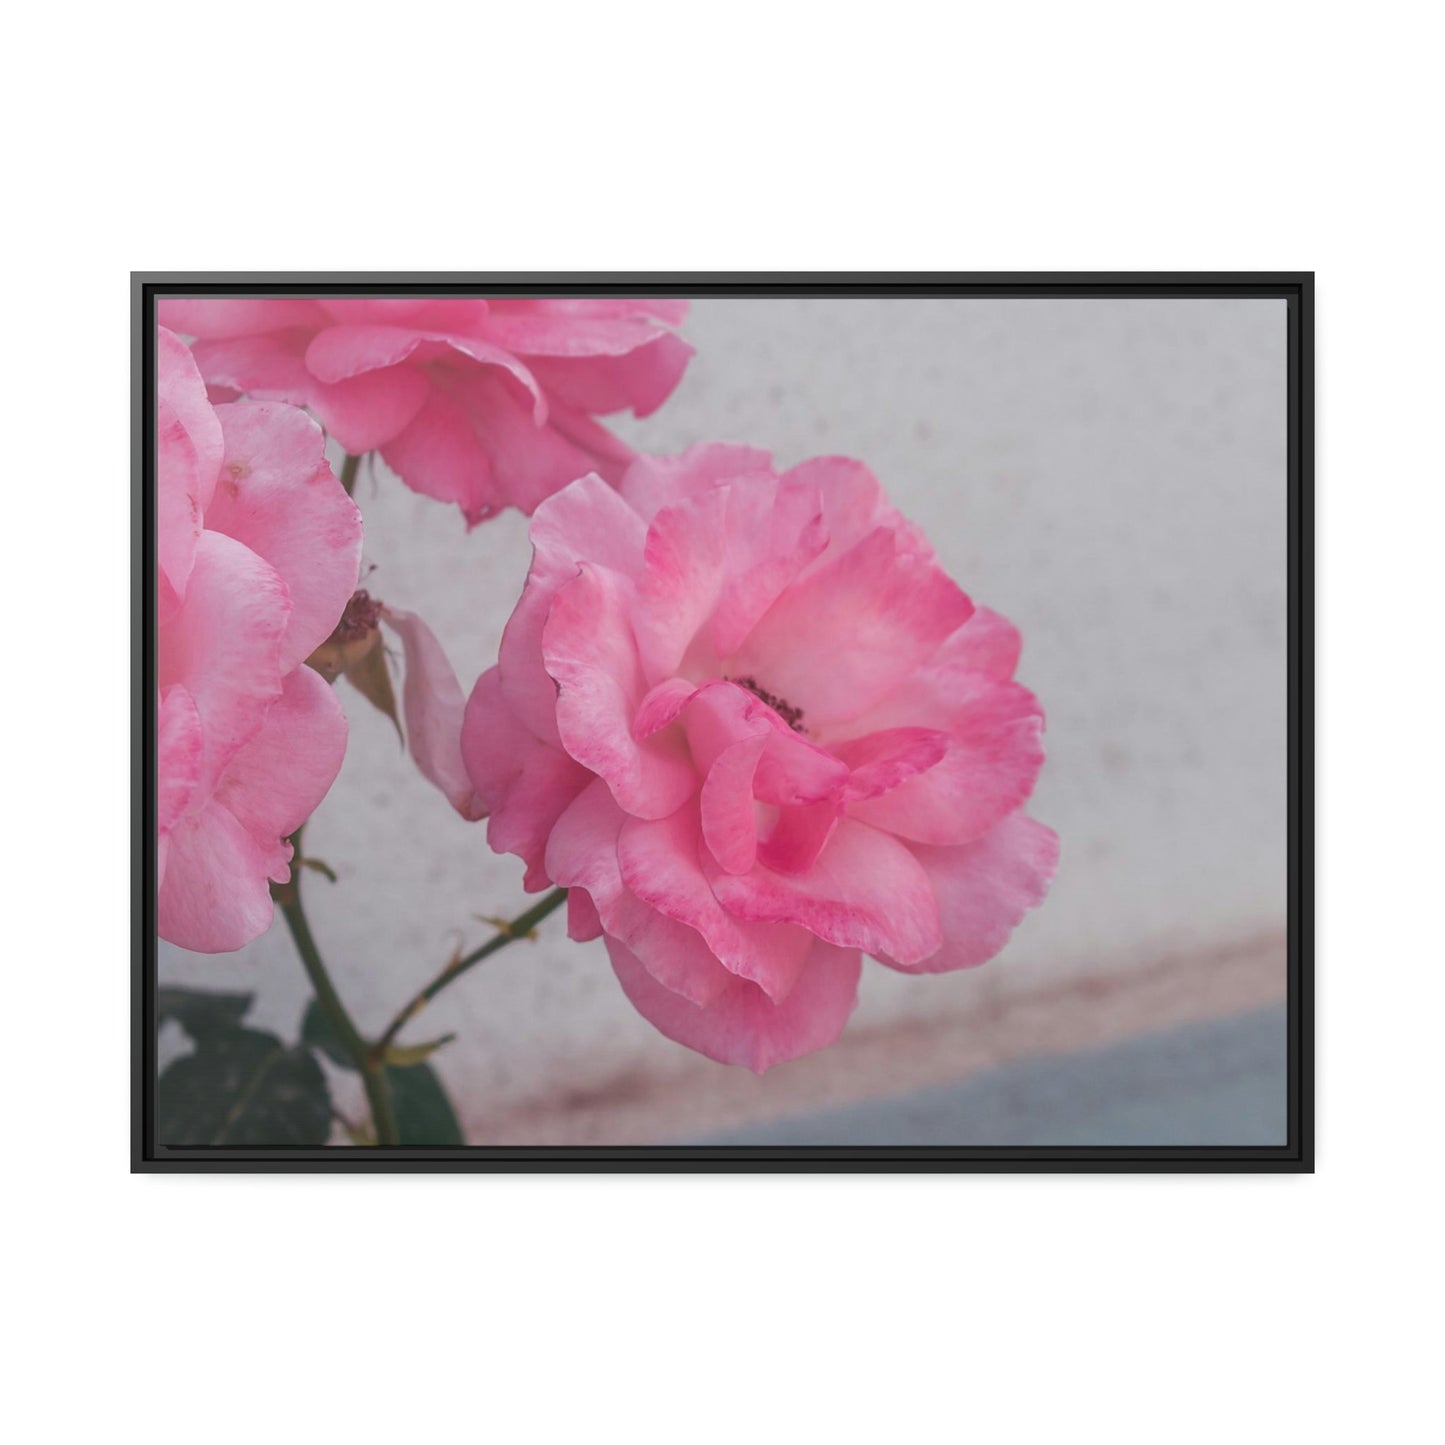 Floral Dreams: Canvas Print of Flowers for Bedroom Decor